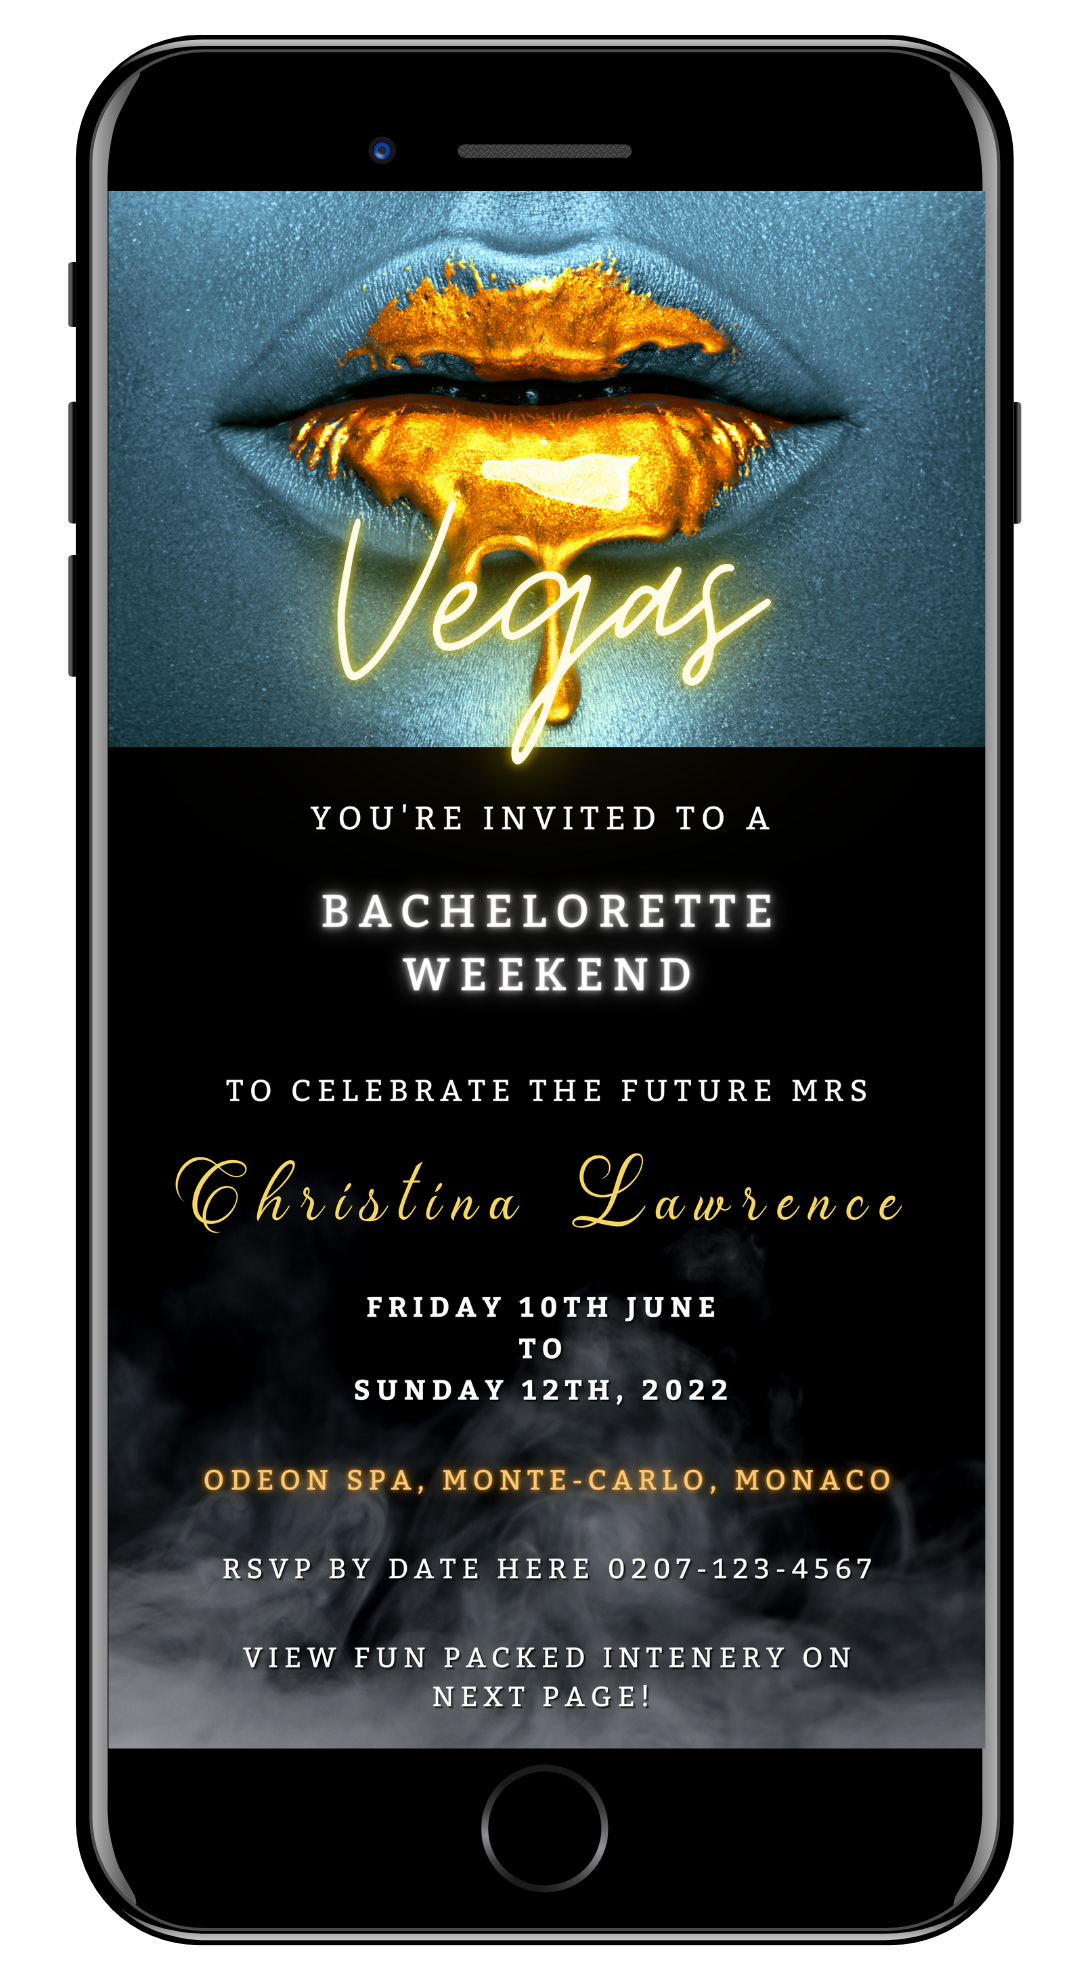 Customizable Smoking Silver Gold Hot Lips Neon digital invitation for bachelorette events, displayed on a smartphone screen with editable text via Canva.